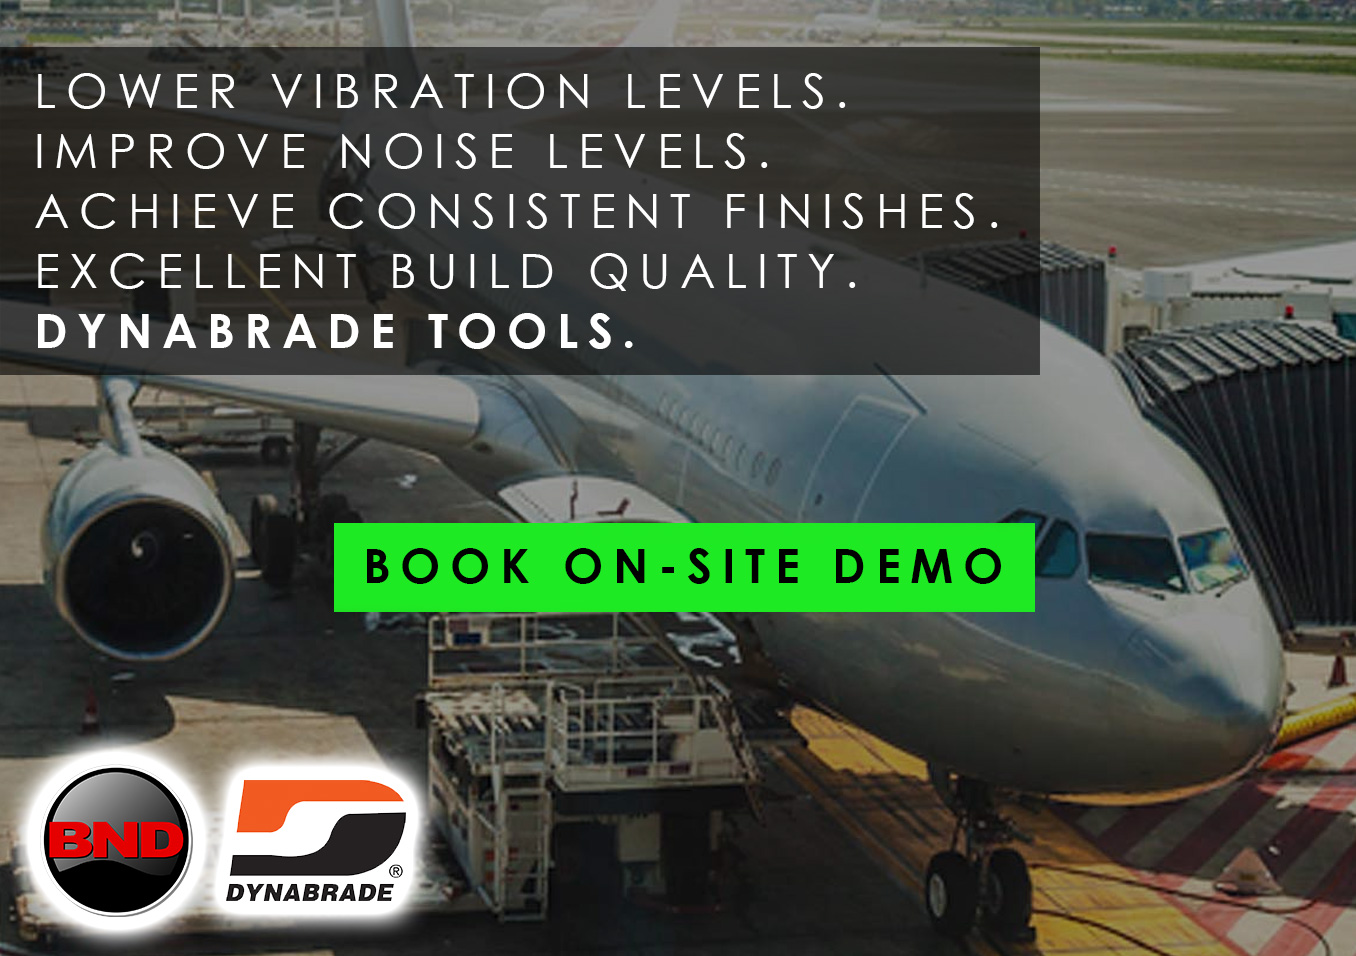 Dynabrade Tools for Aerospace and Defence